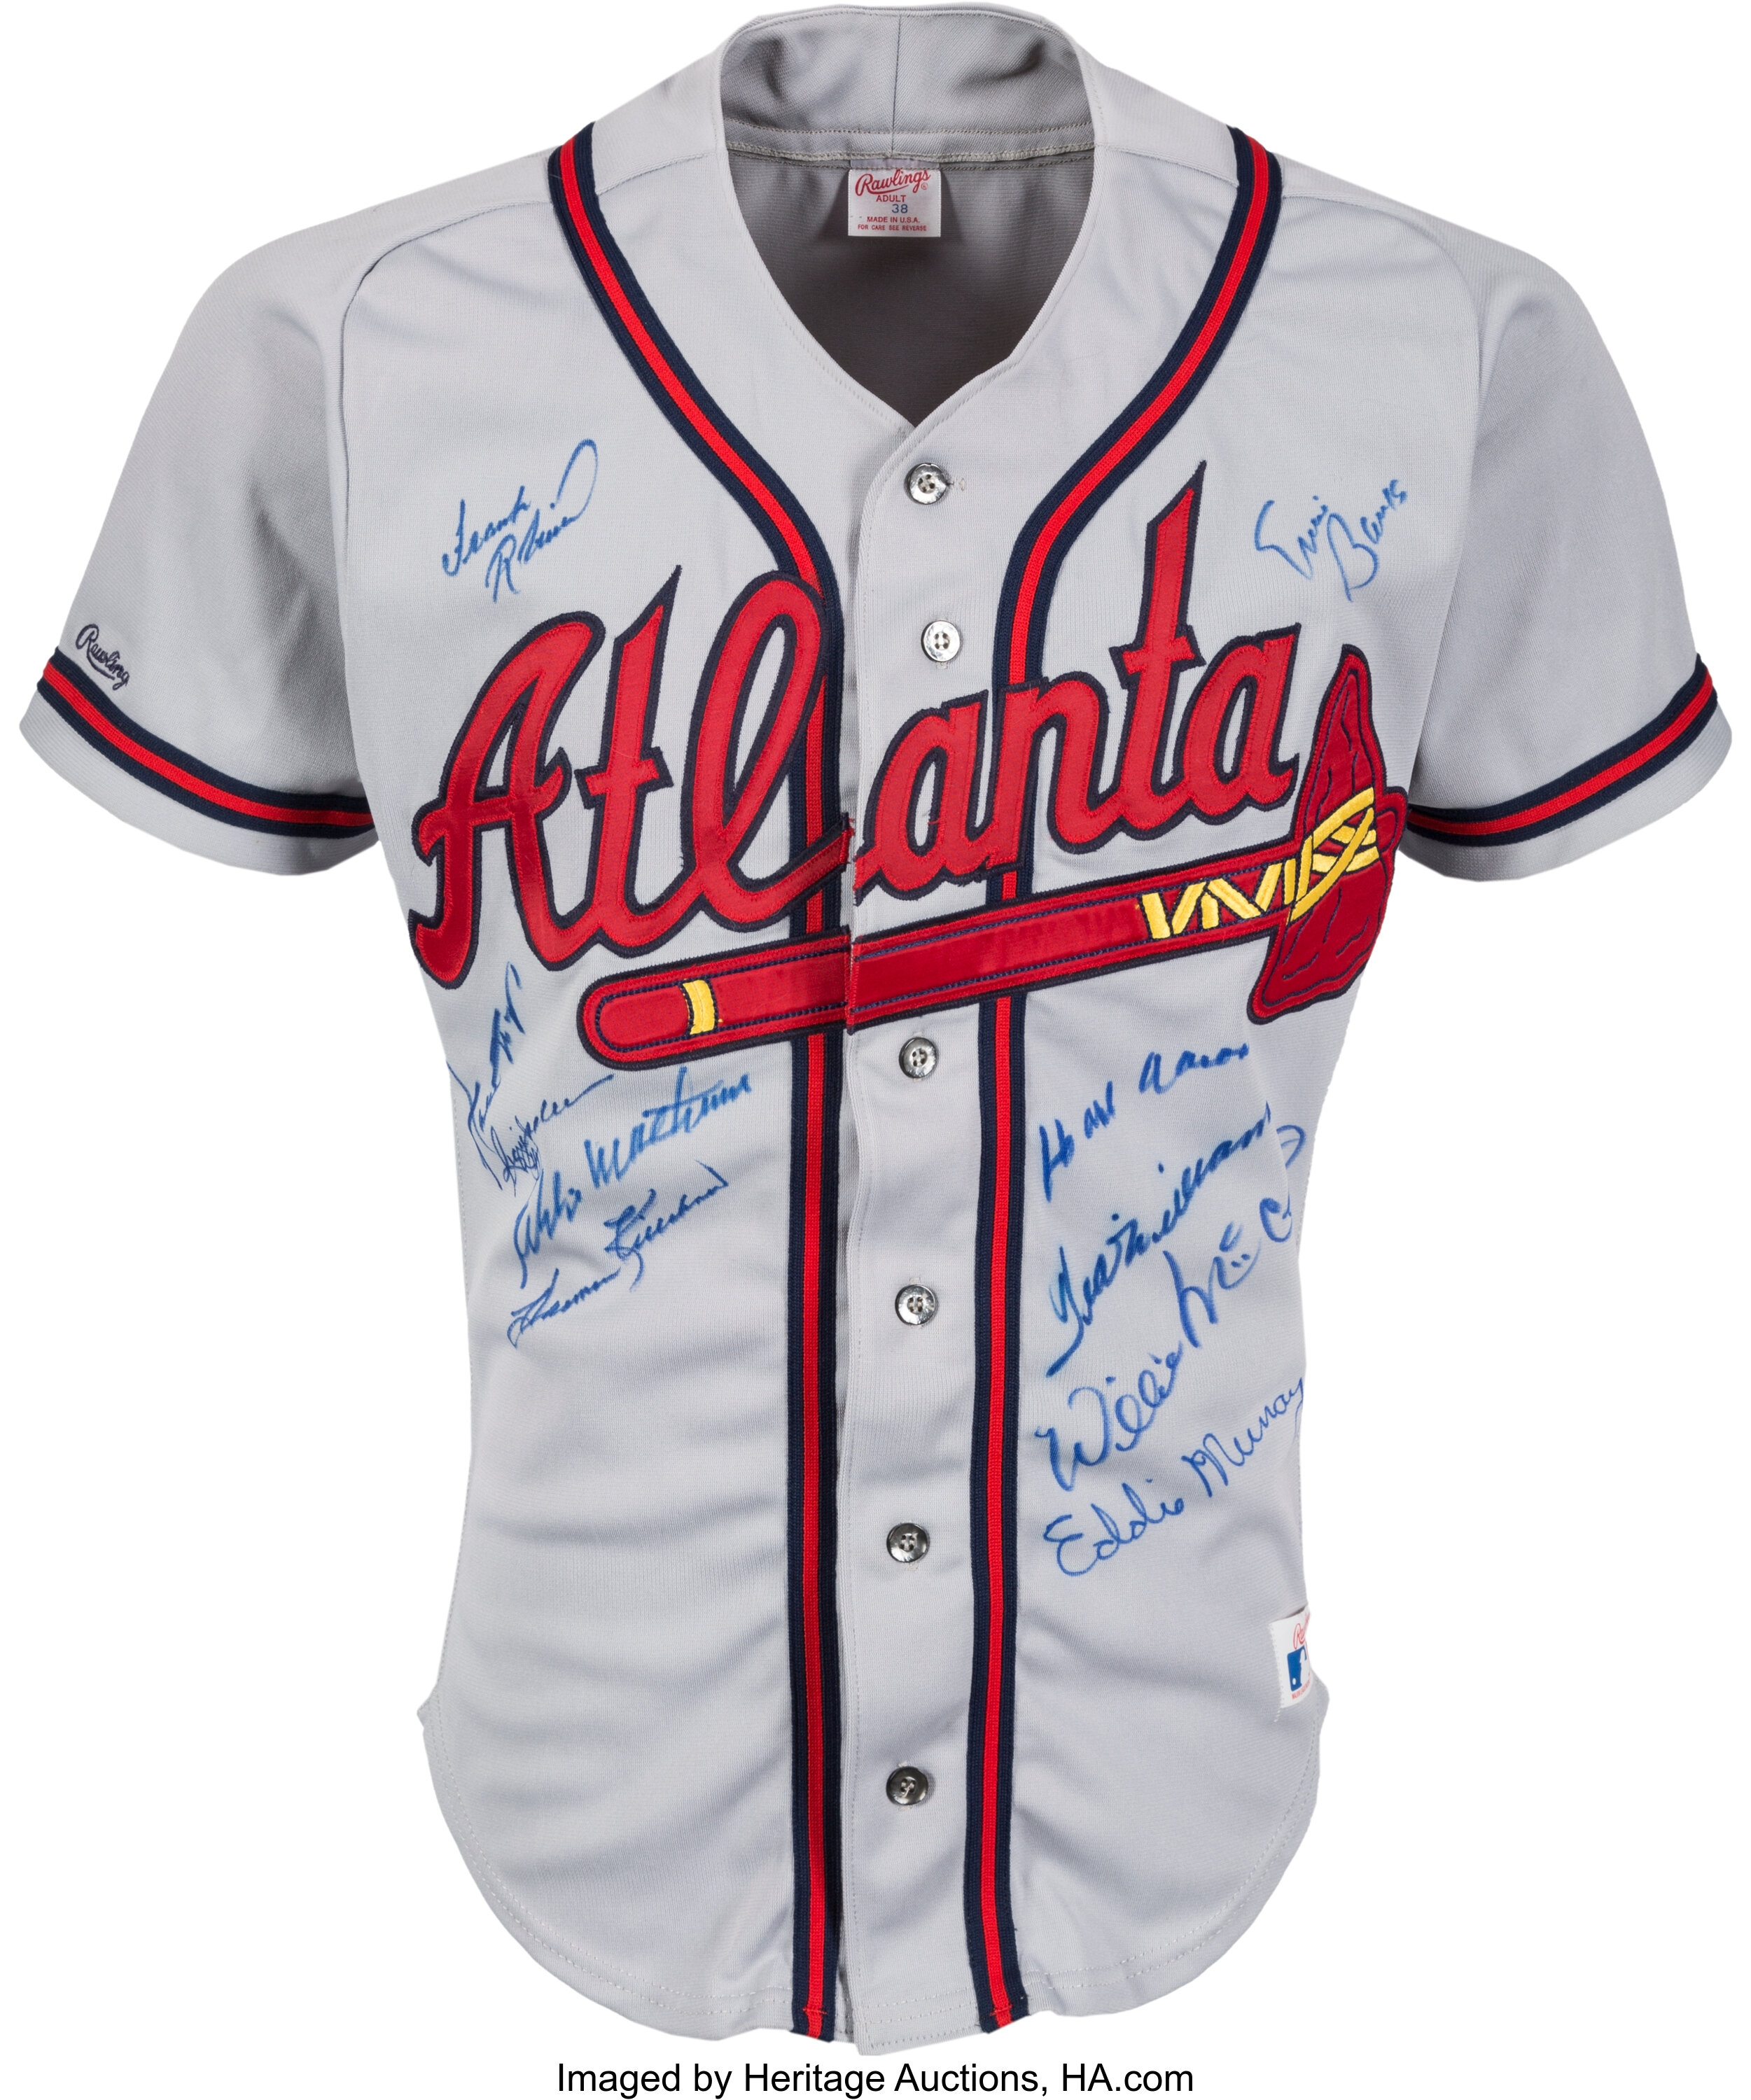 Rawlings Replica Adult Home Jersey 5X